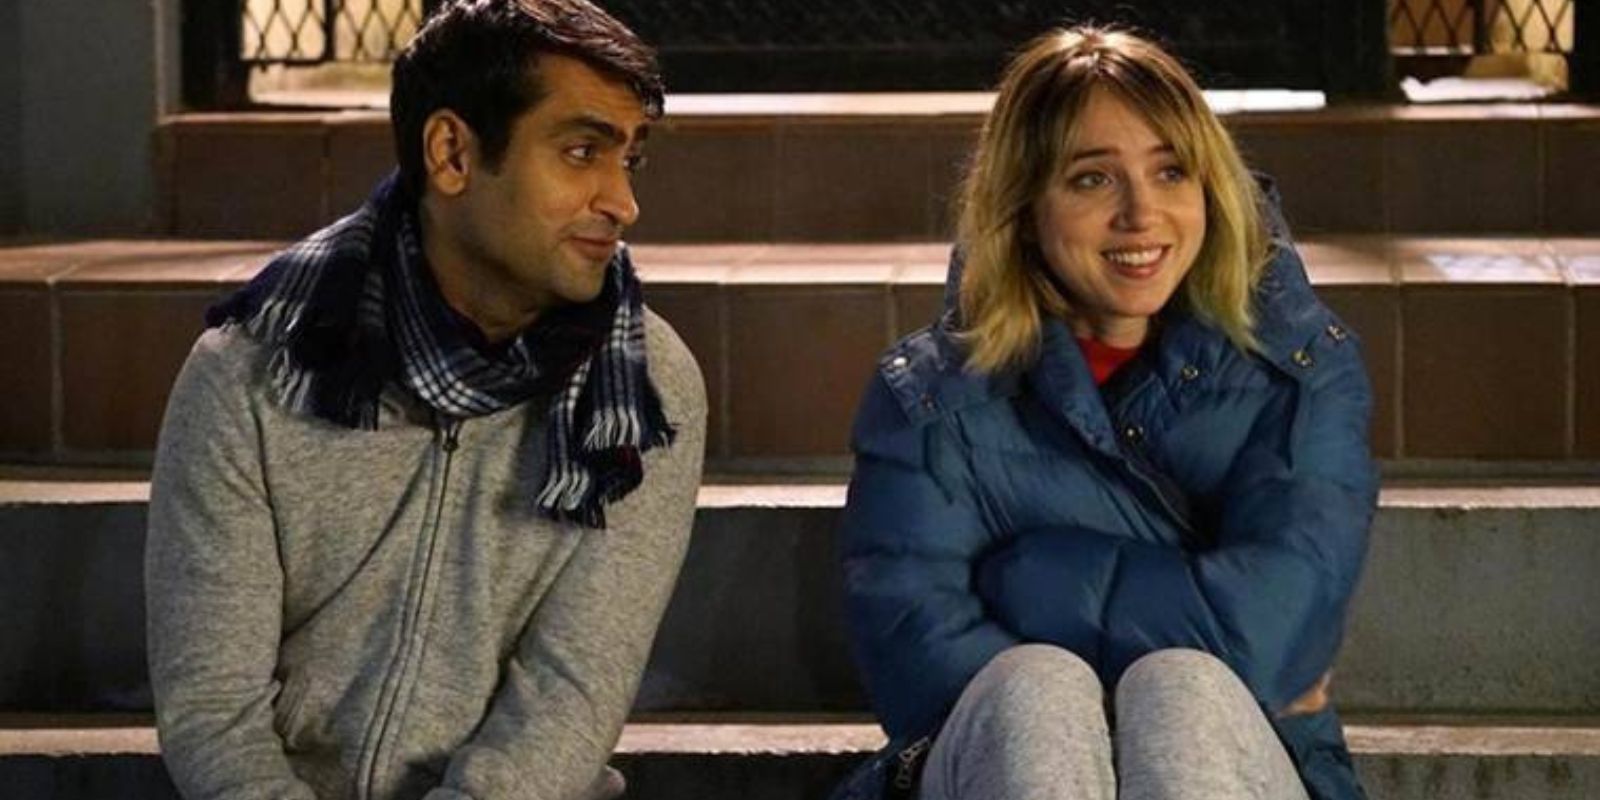 Kumail and Emily sit on steps at night